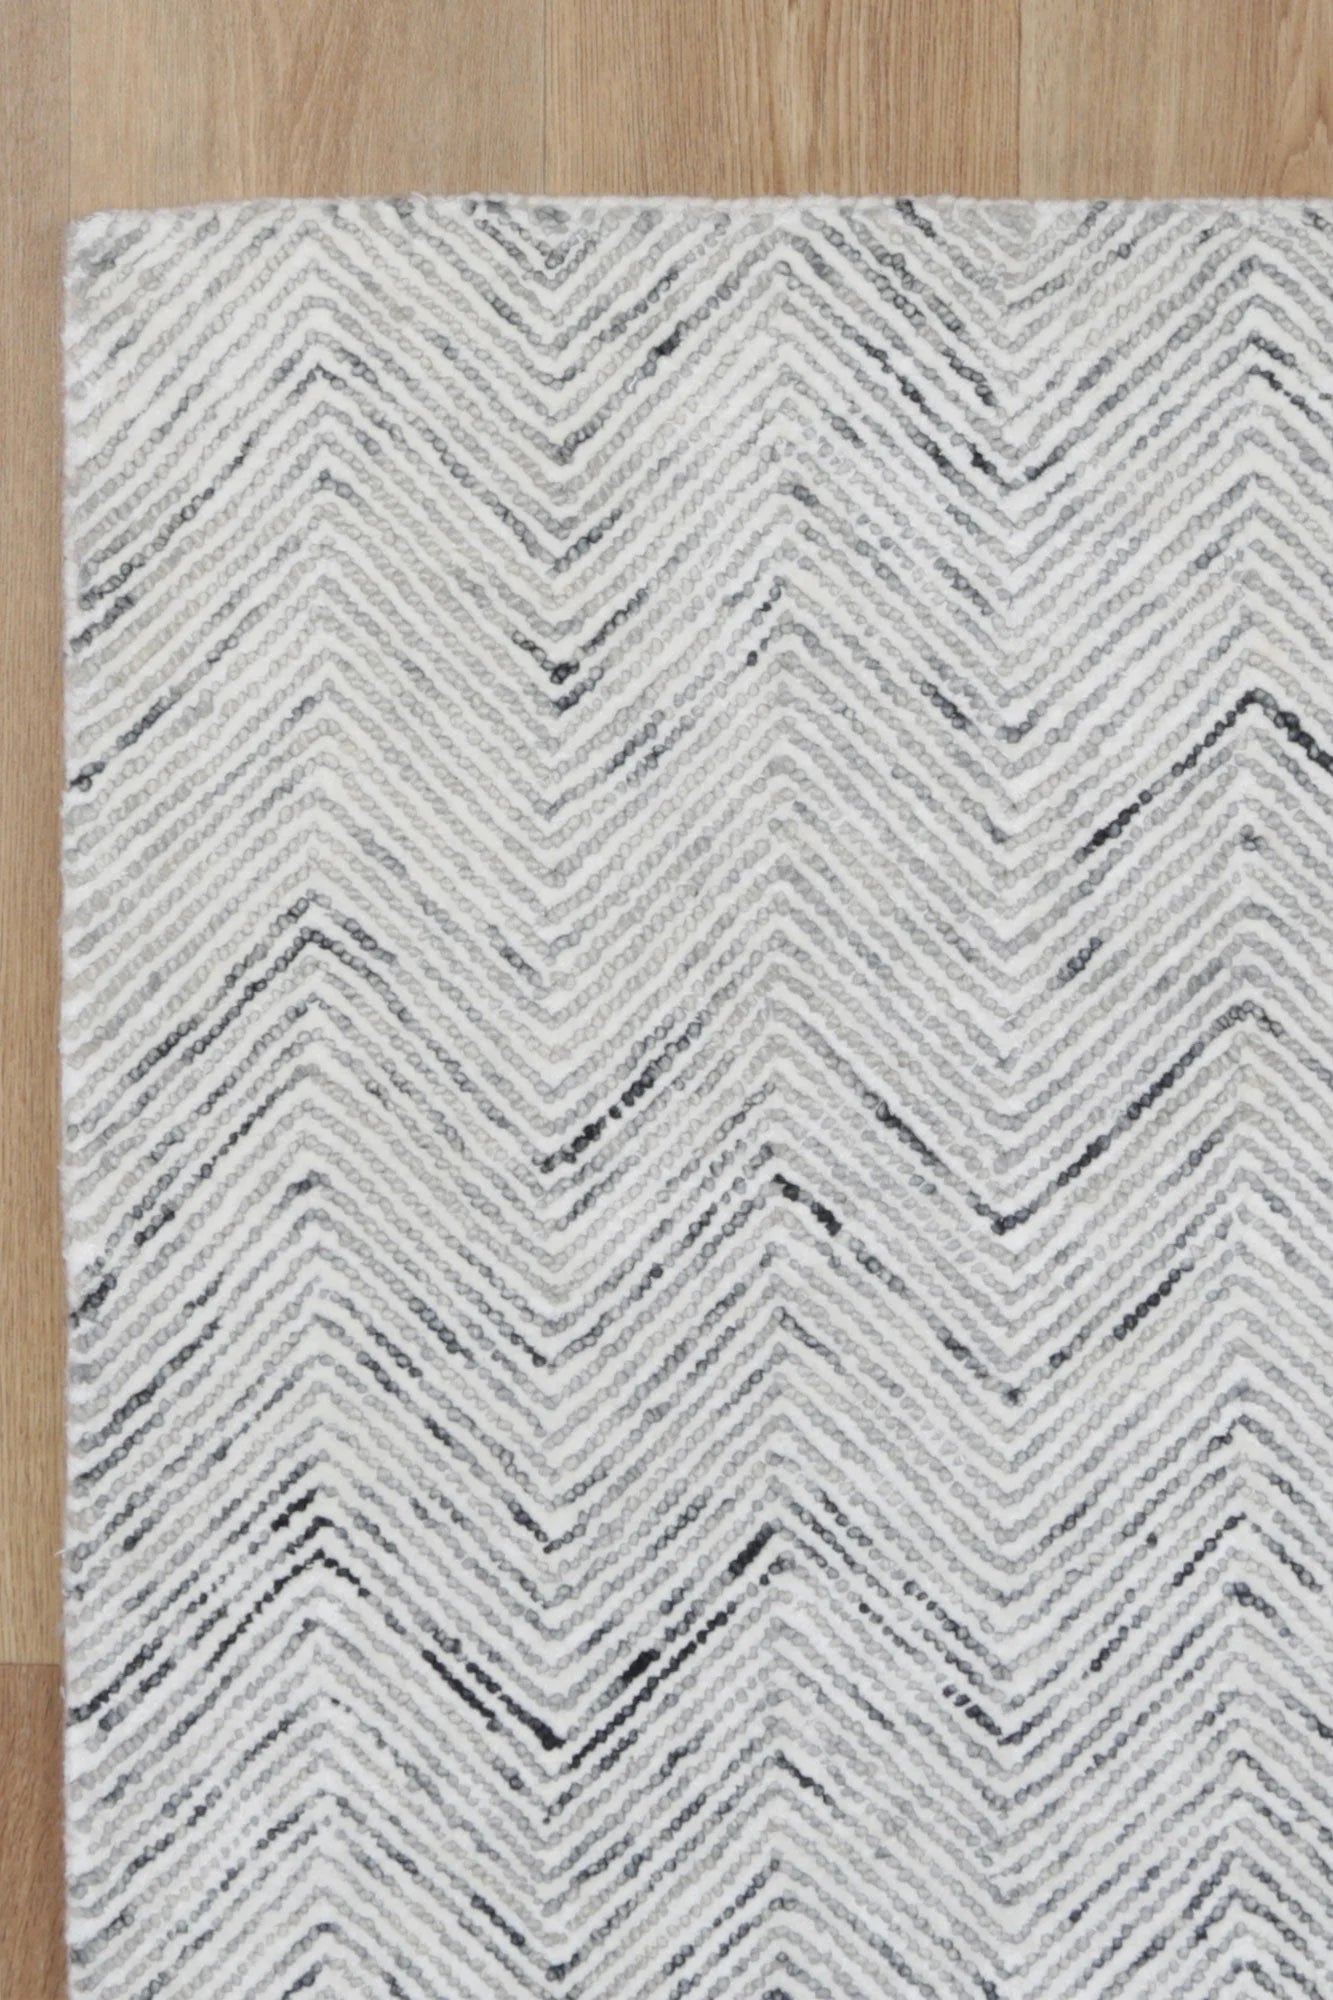 Detailed close-up of the Astrid Grey Rug's herringbone texture, emphasizing the luxurious blend of wool and viscose.